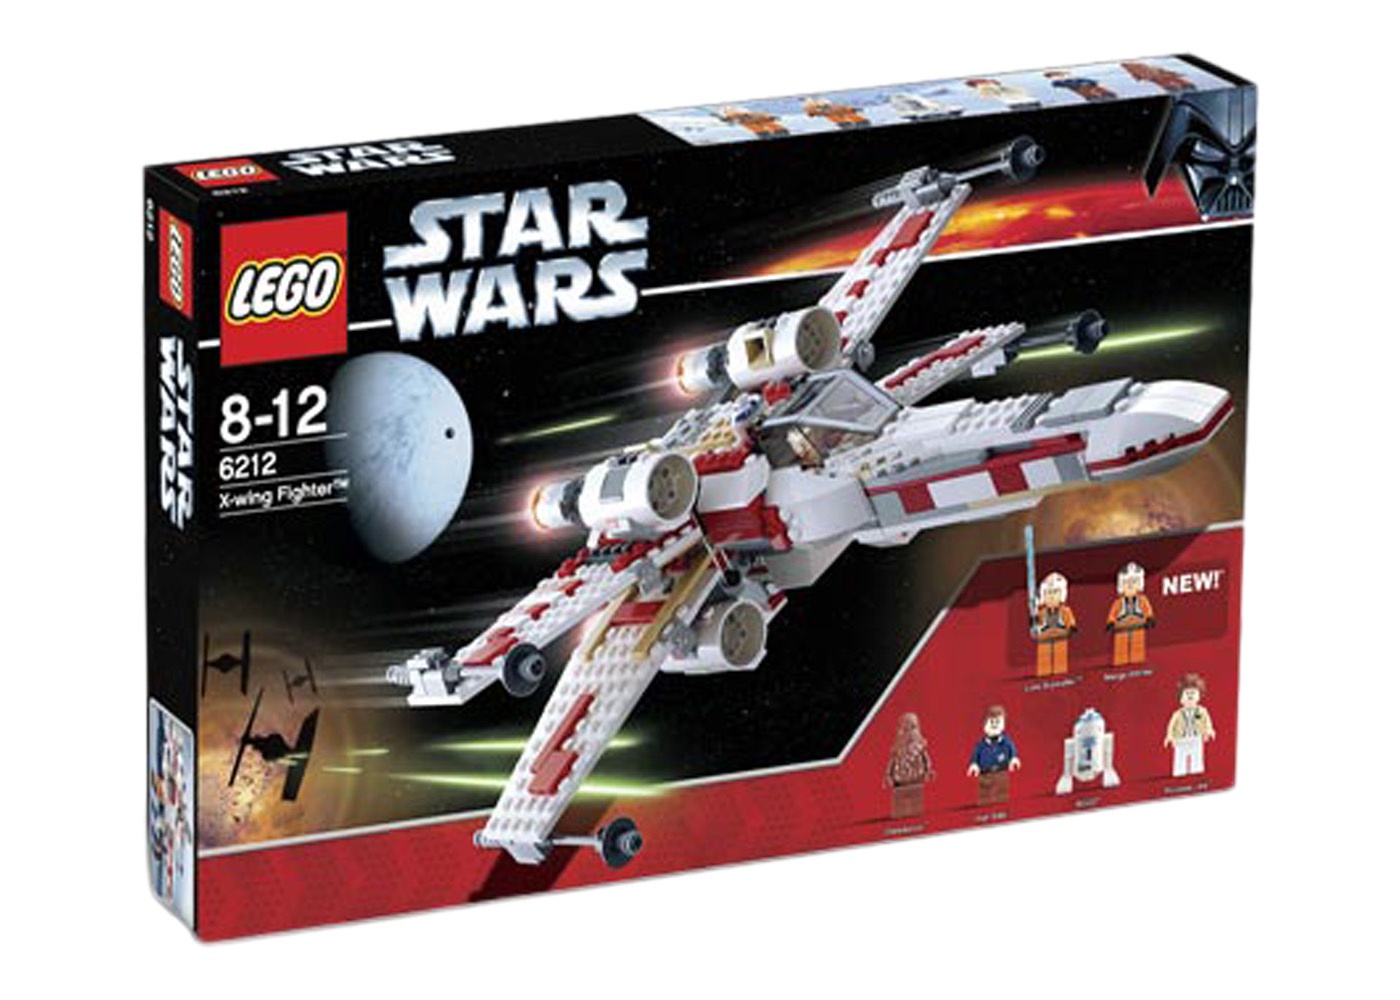 LEGO Star Wars X-wing Fighter Set 6212